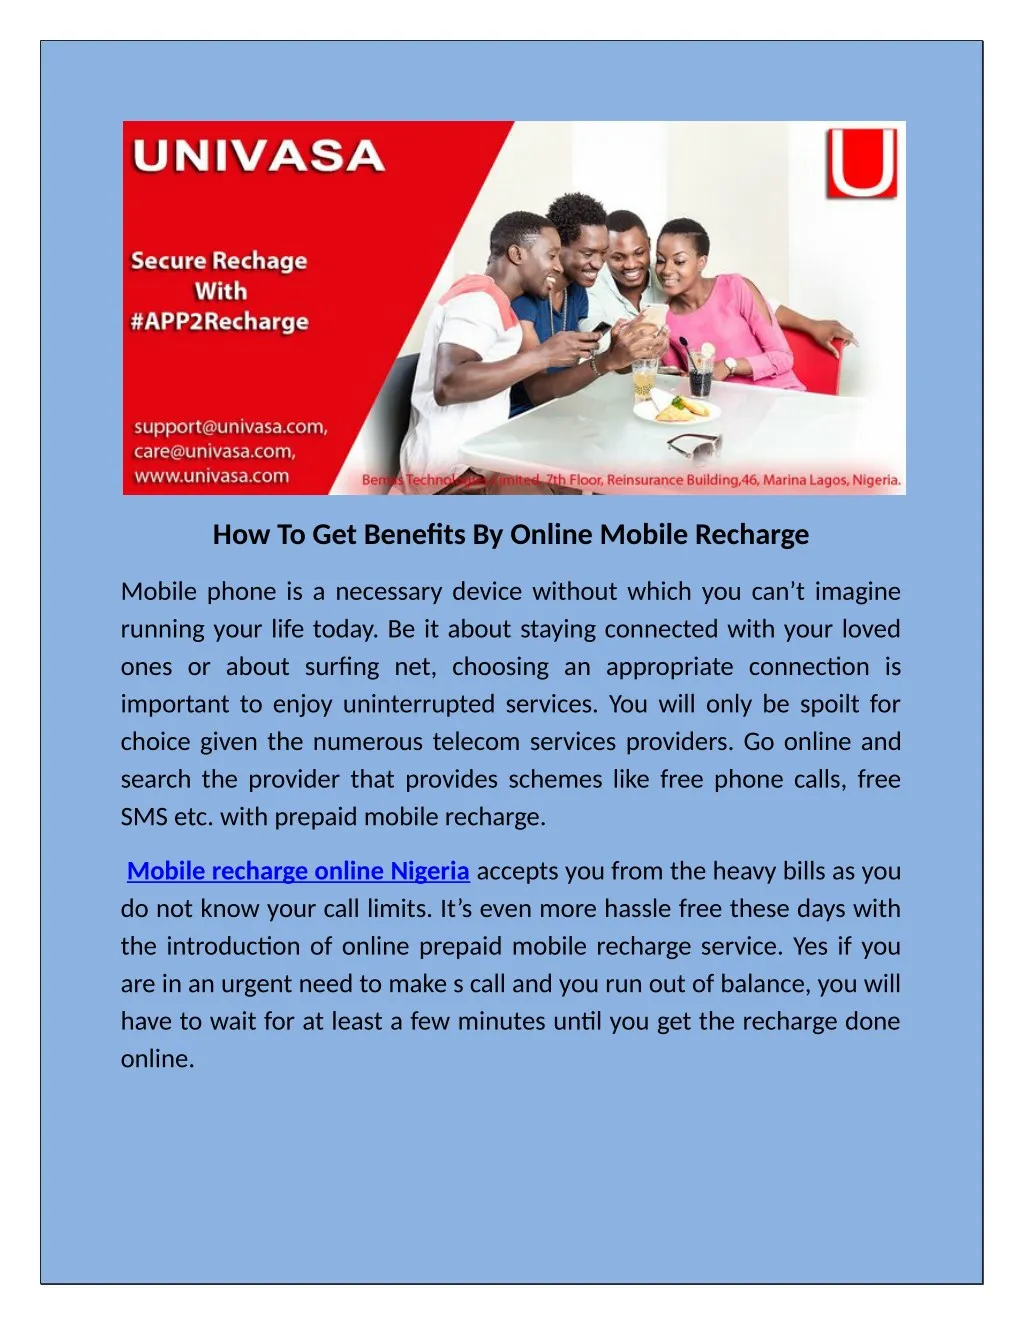 how to get benefits by online mobile recharge